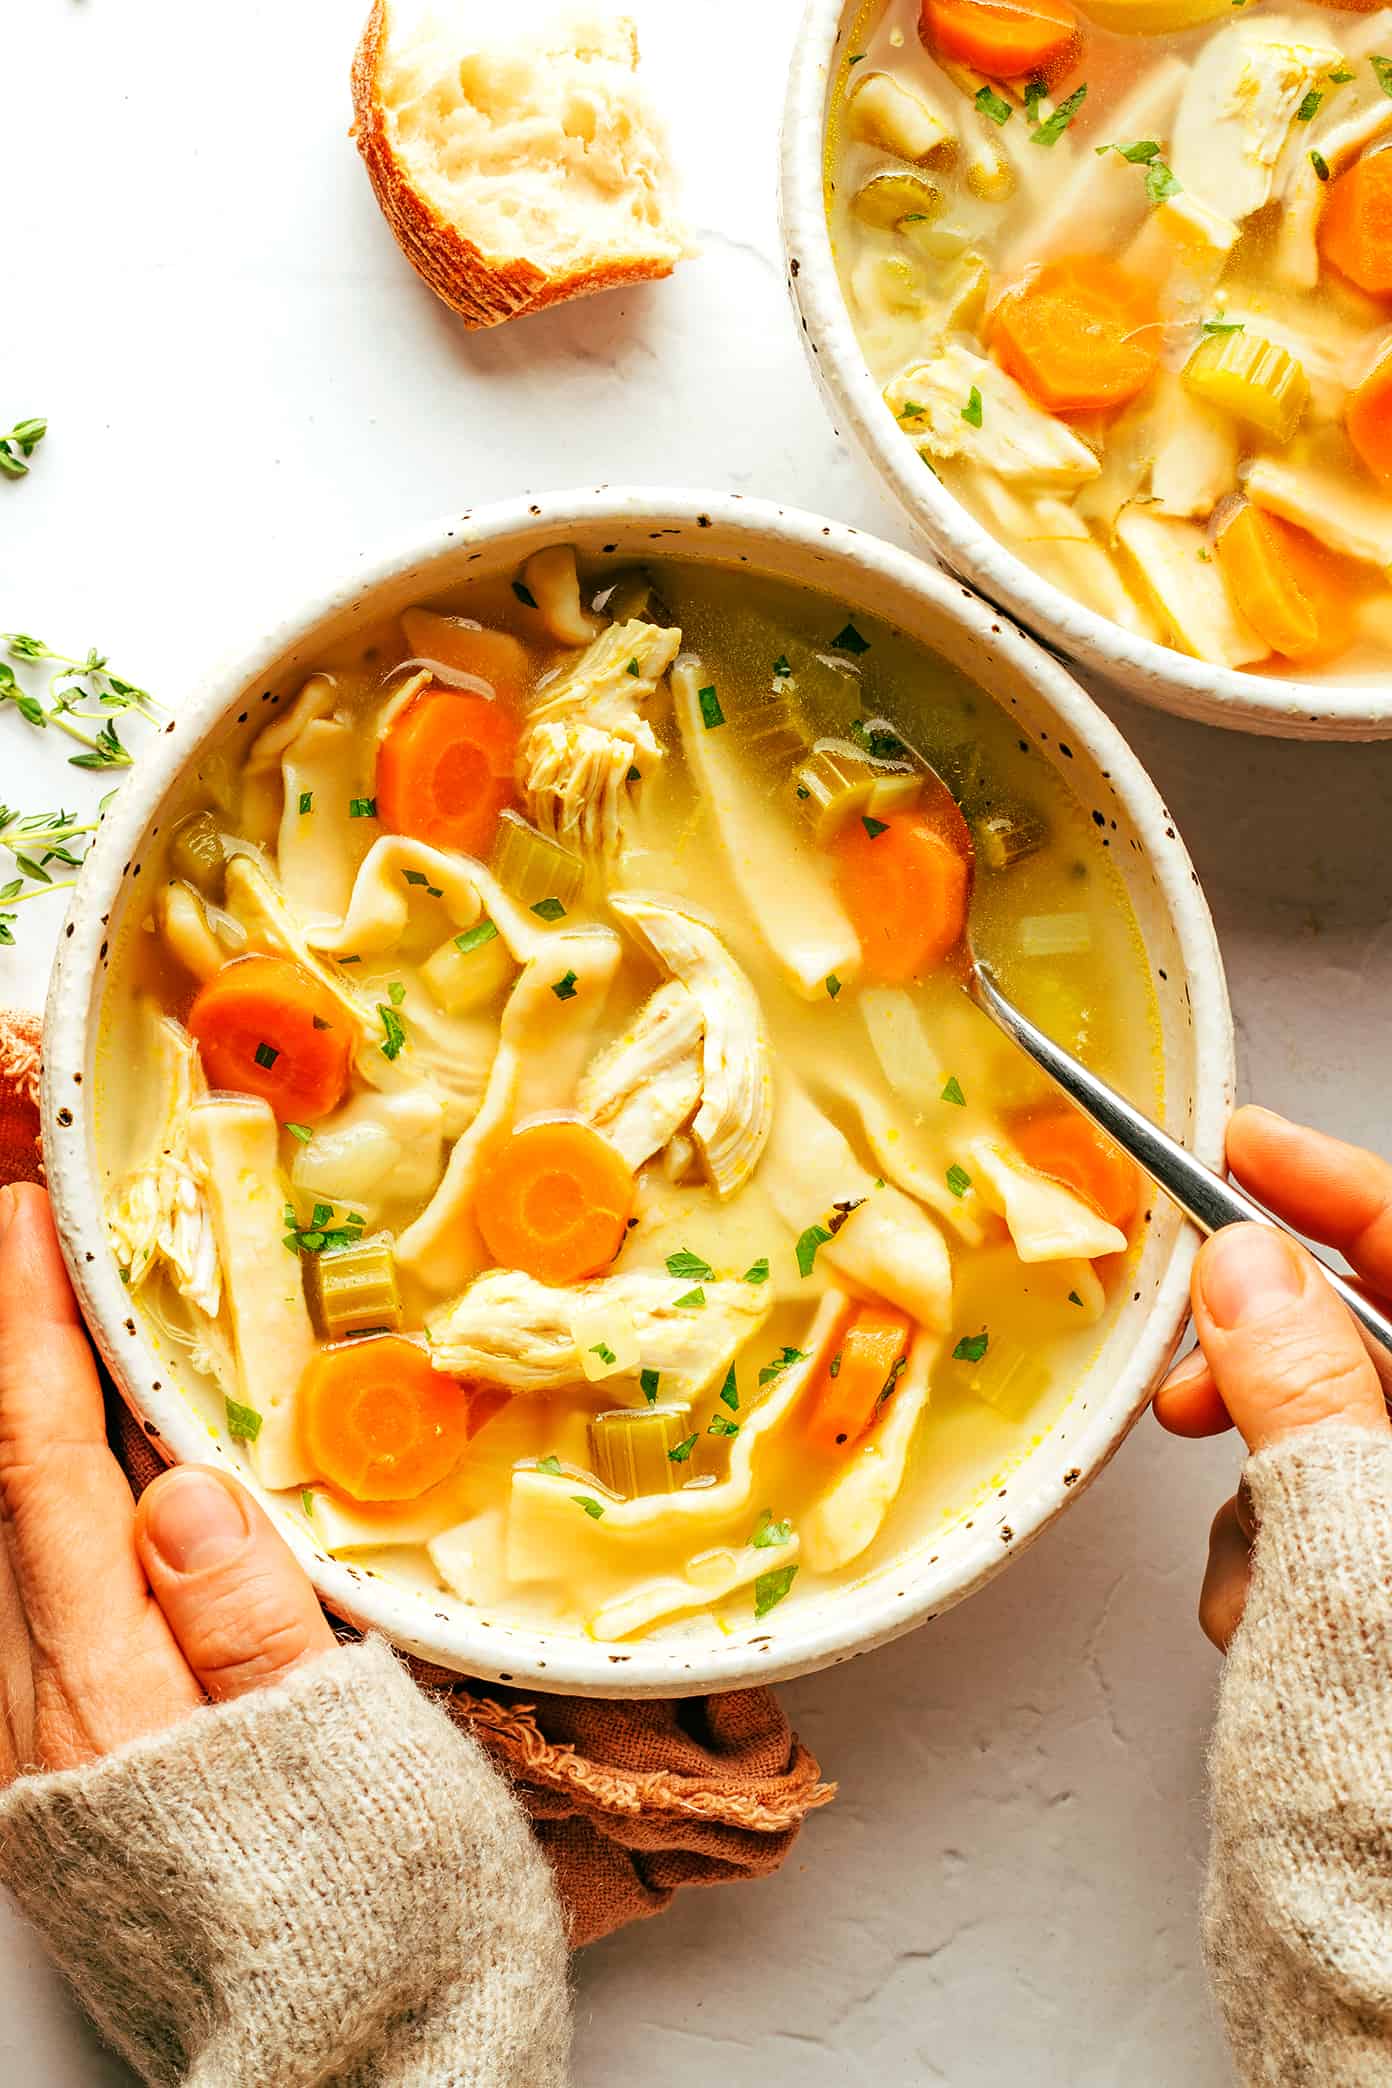 Bowls of homemade chicken noodle soup with bread